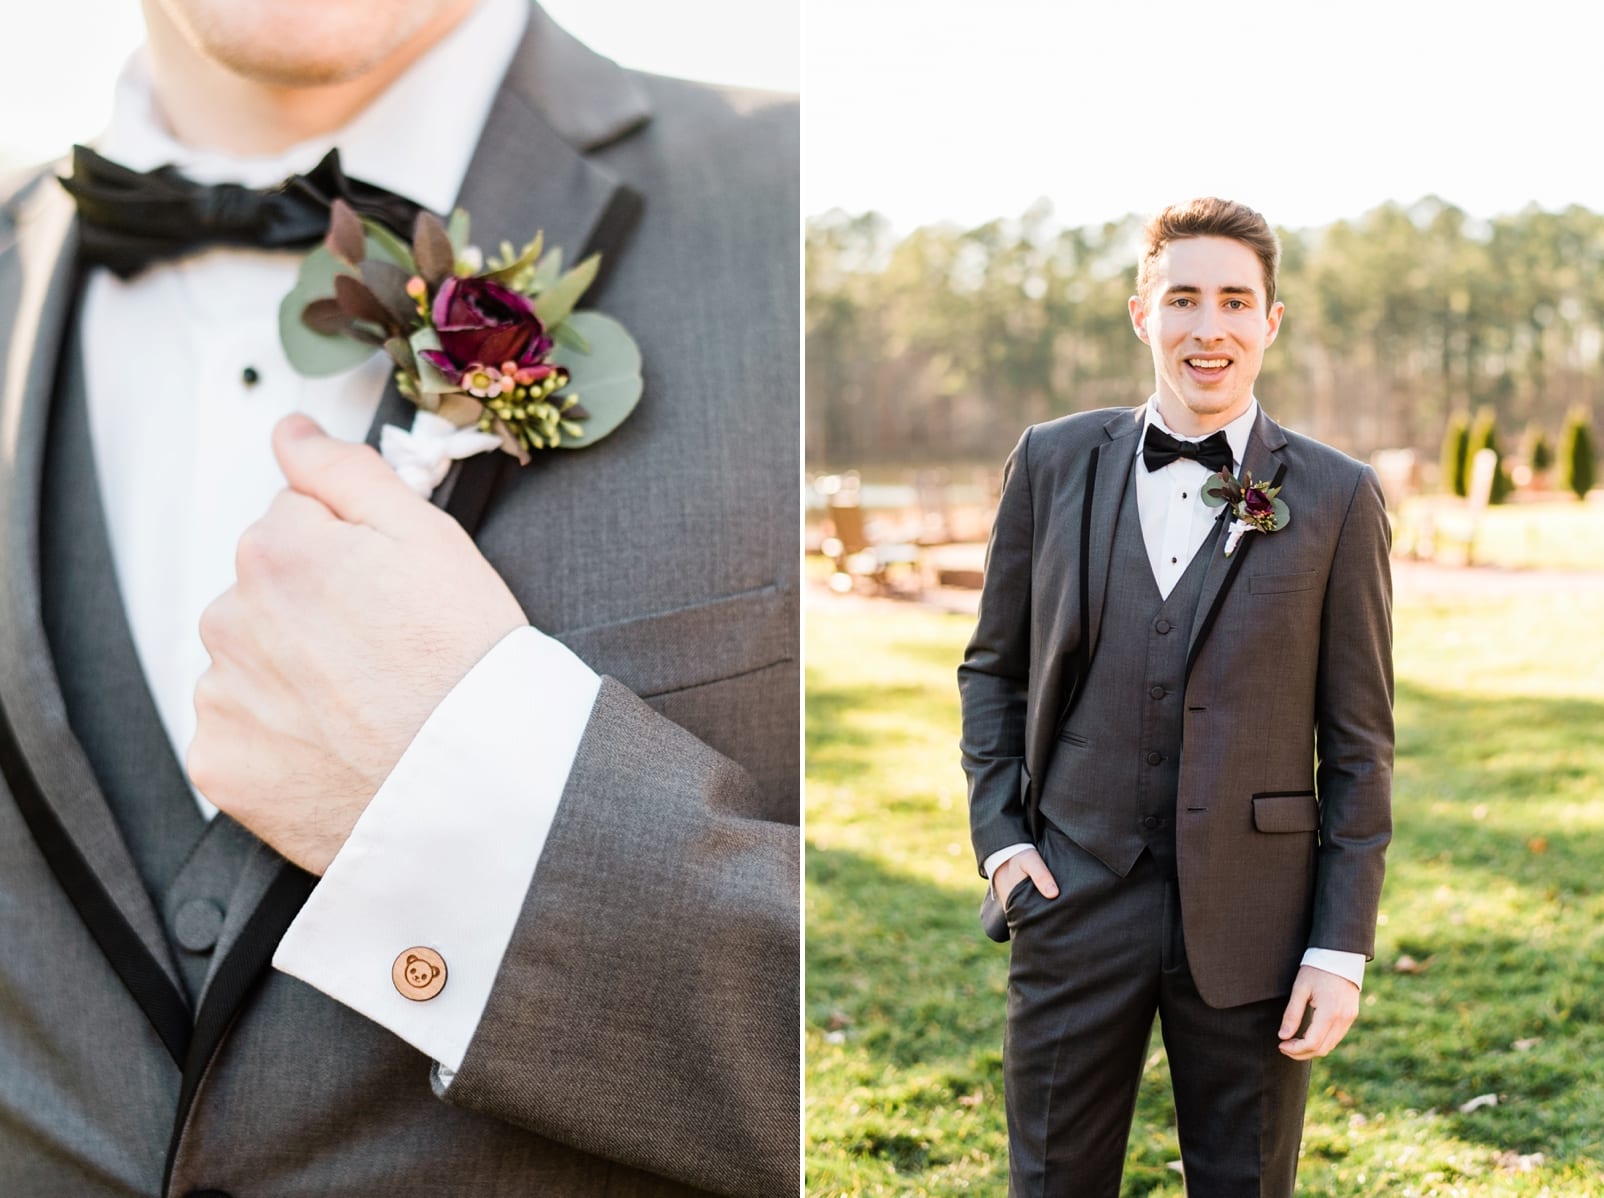 Generation Tux groom in black tuxedo and a boutonniere with a maroon flower photo